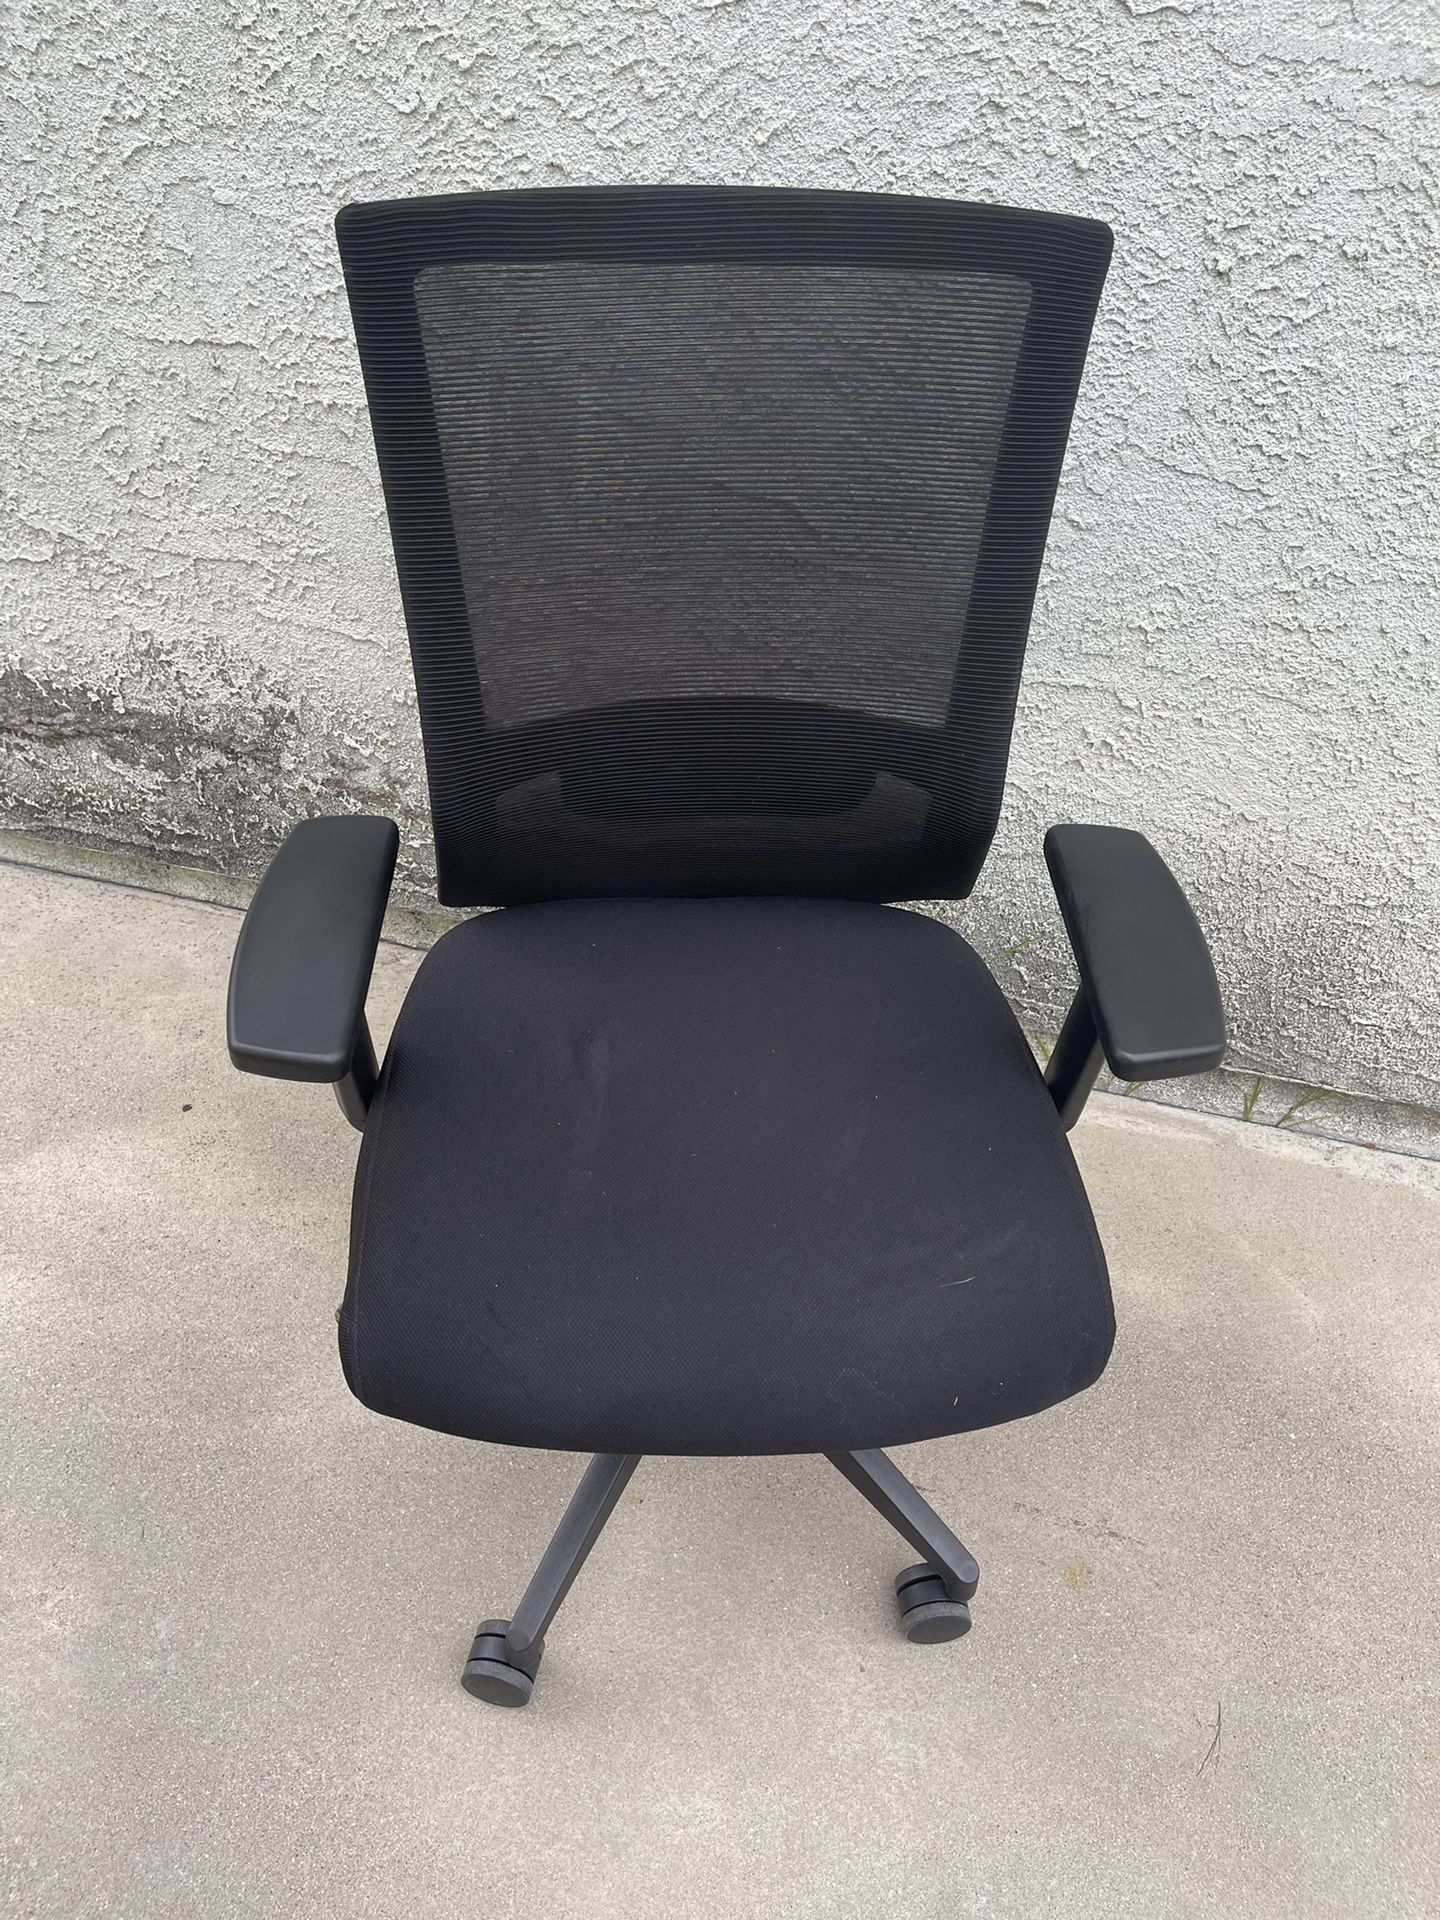 Ergonomic Black Office Chair with Adjustable Features